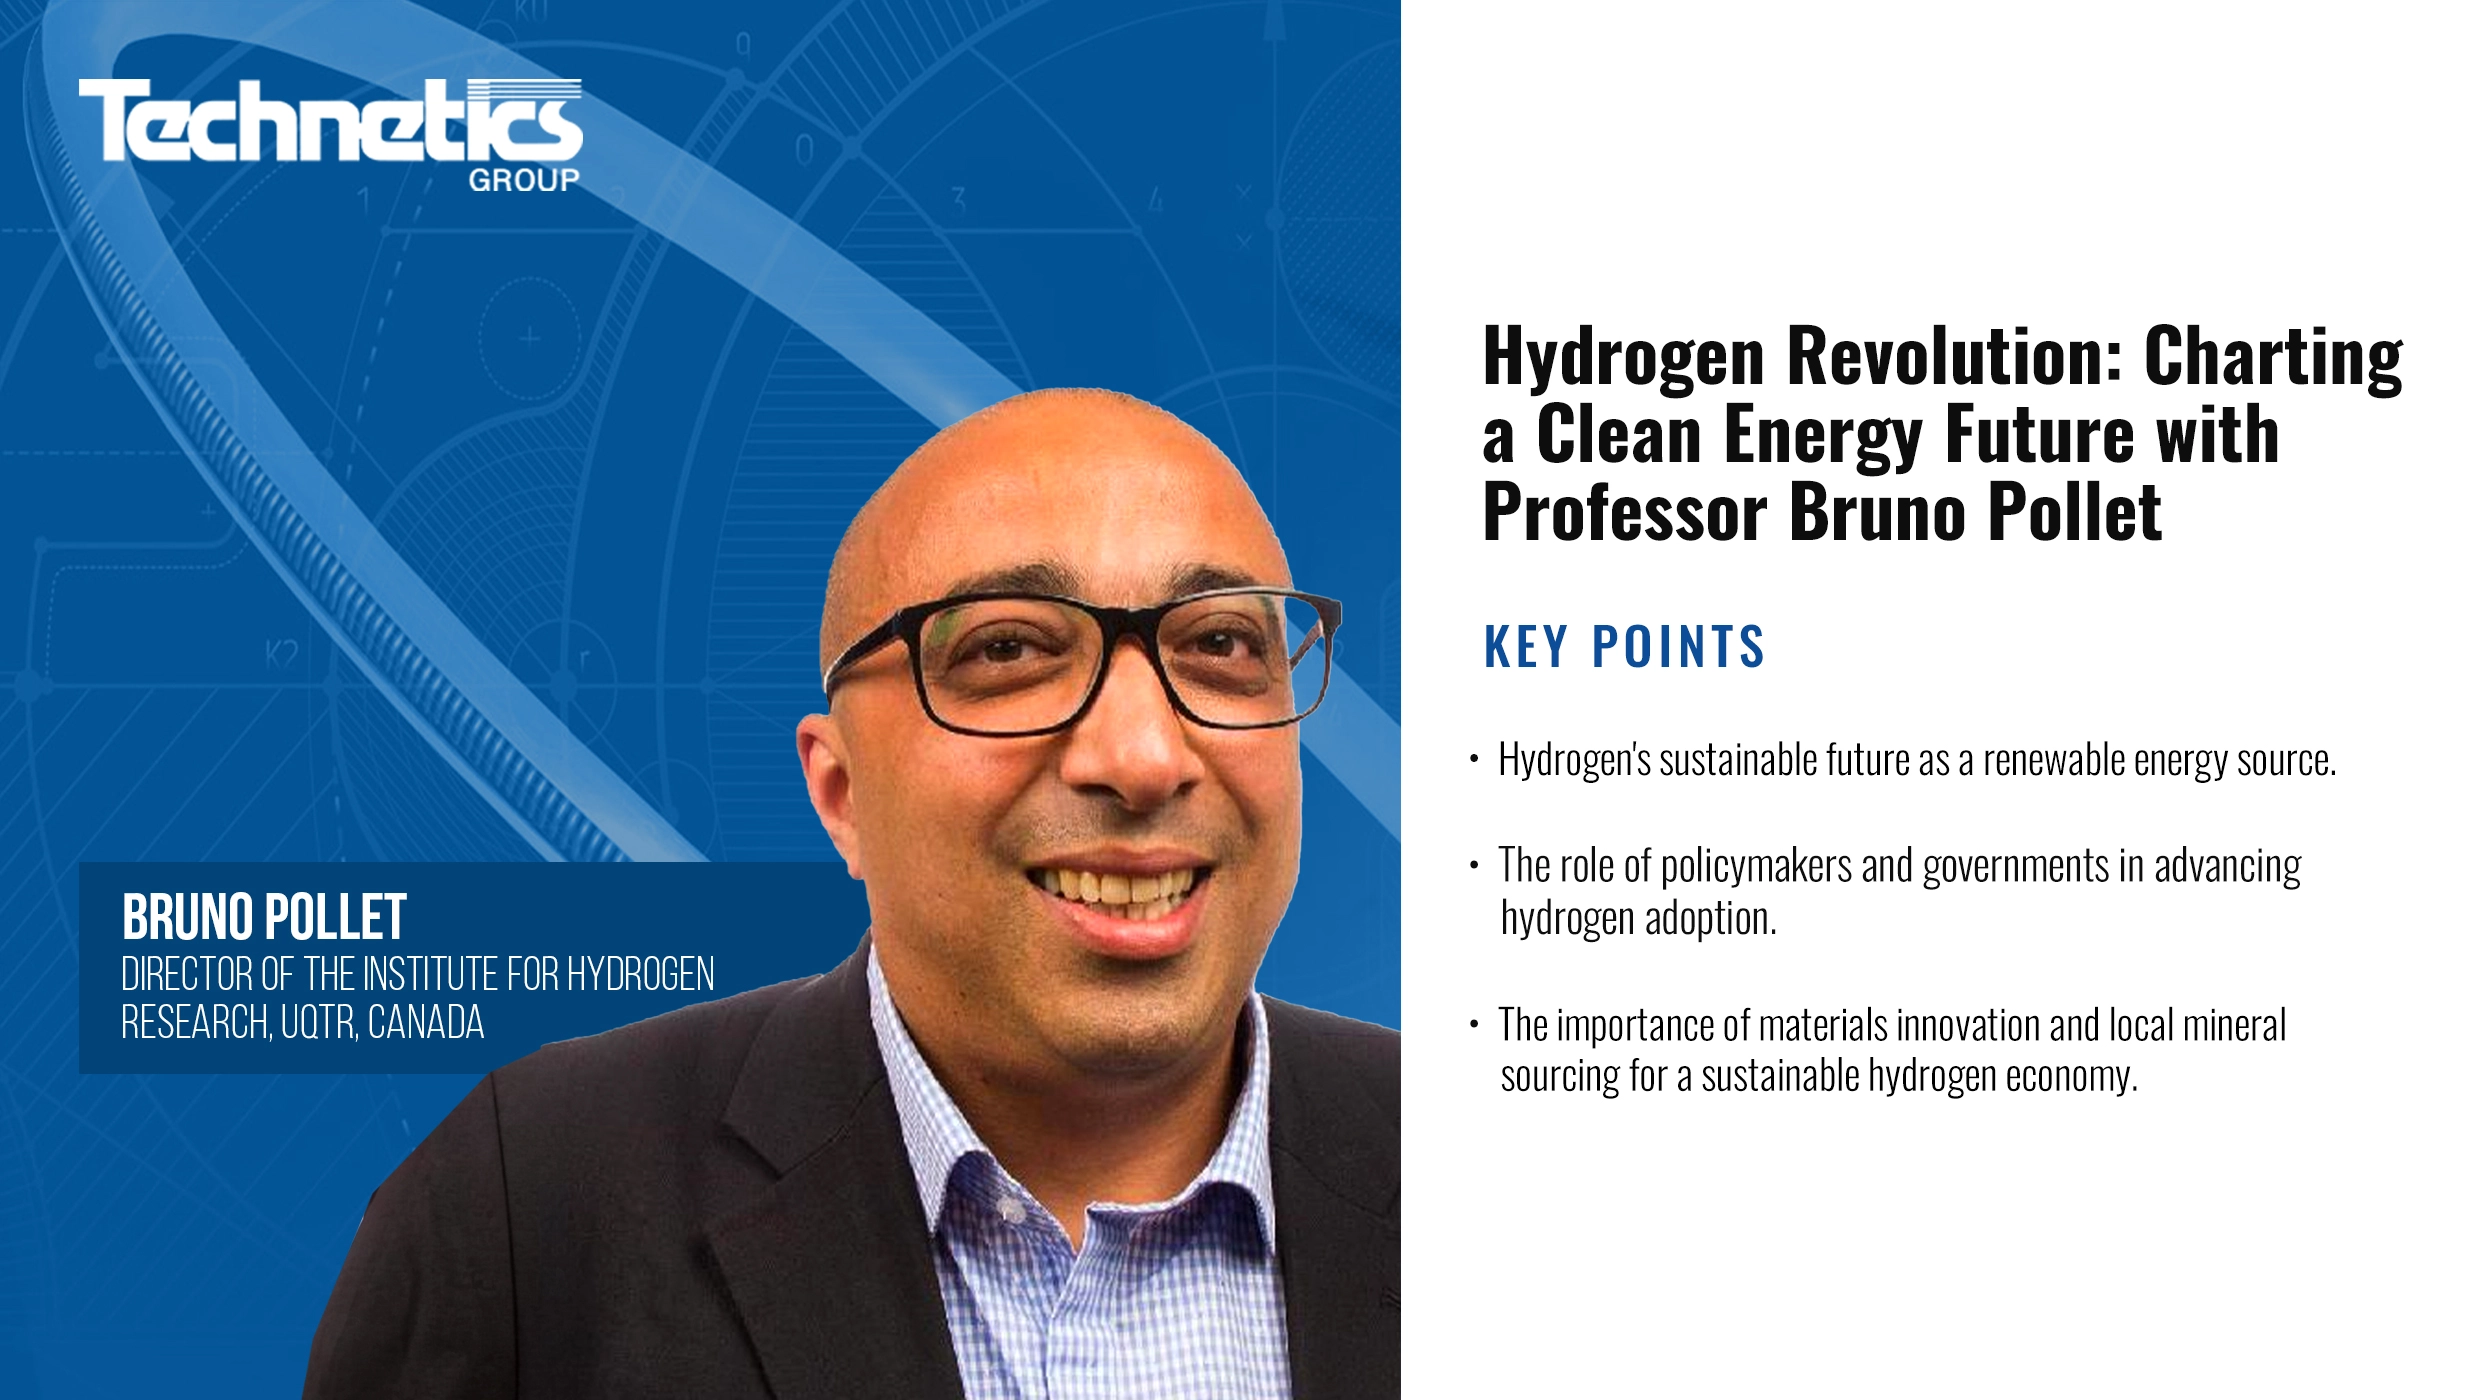 Hydrogen Revolution: Charting a Clean Energy Future with Professor Bruno Pollet